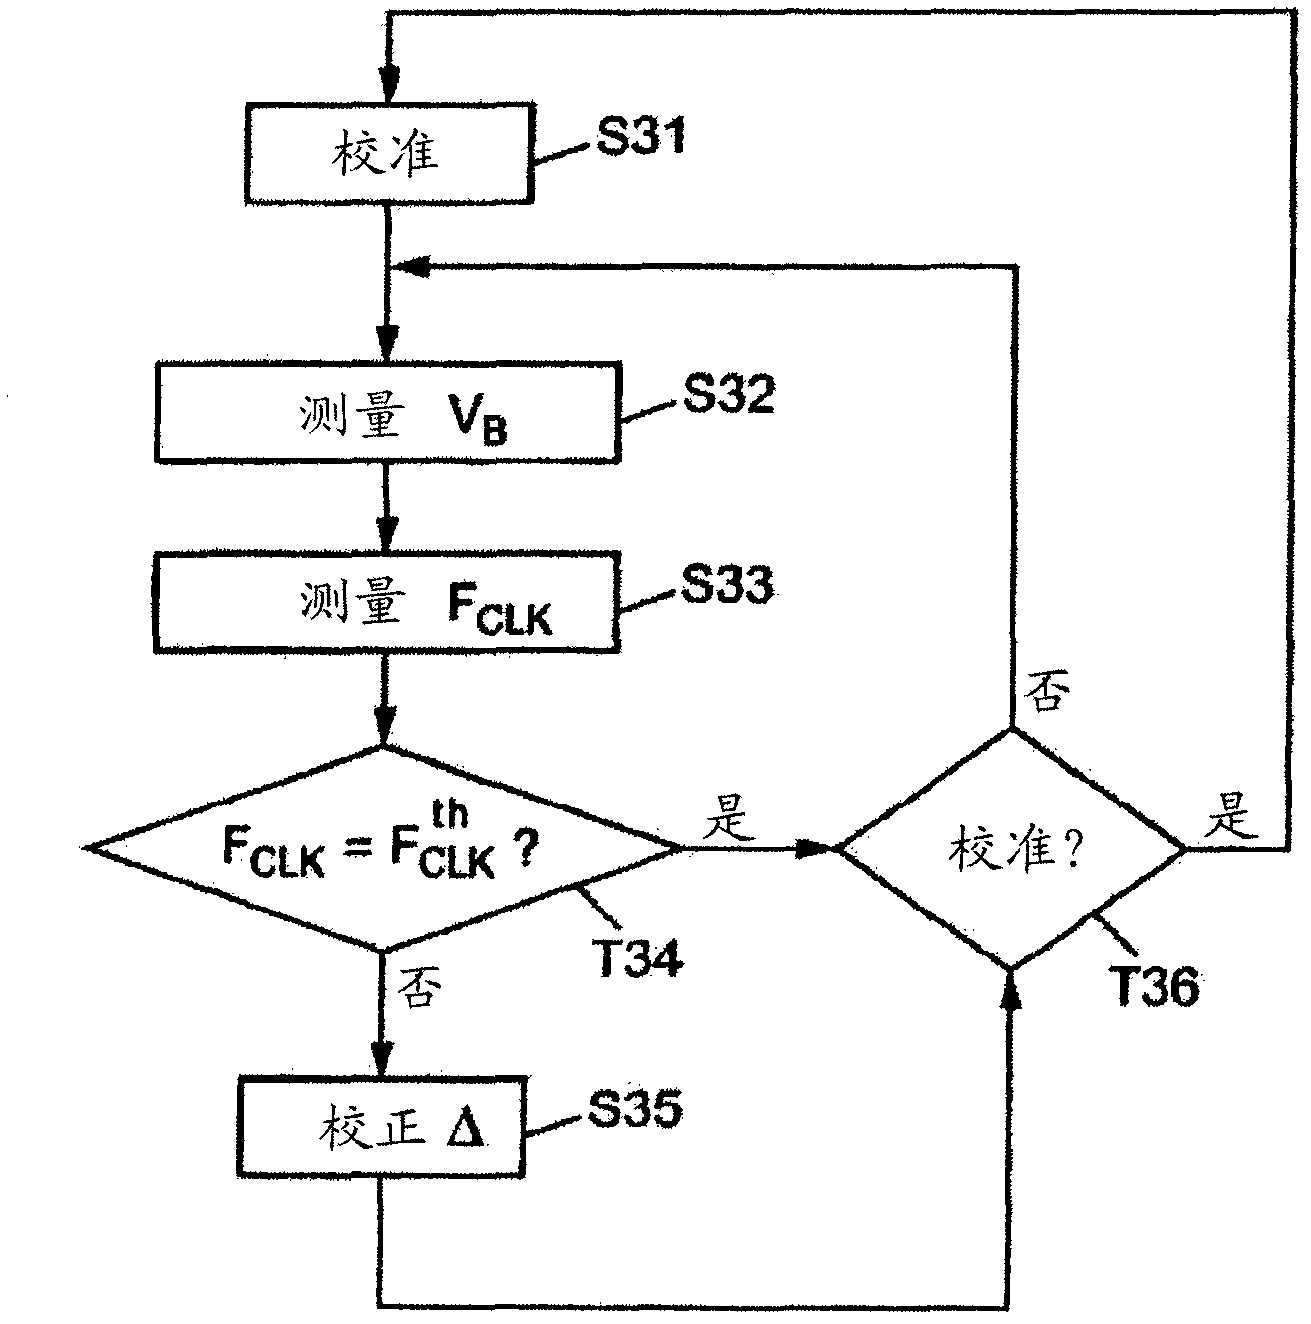 Frequency offset correction